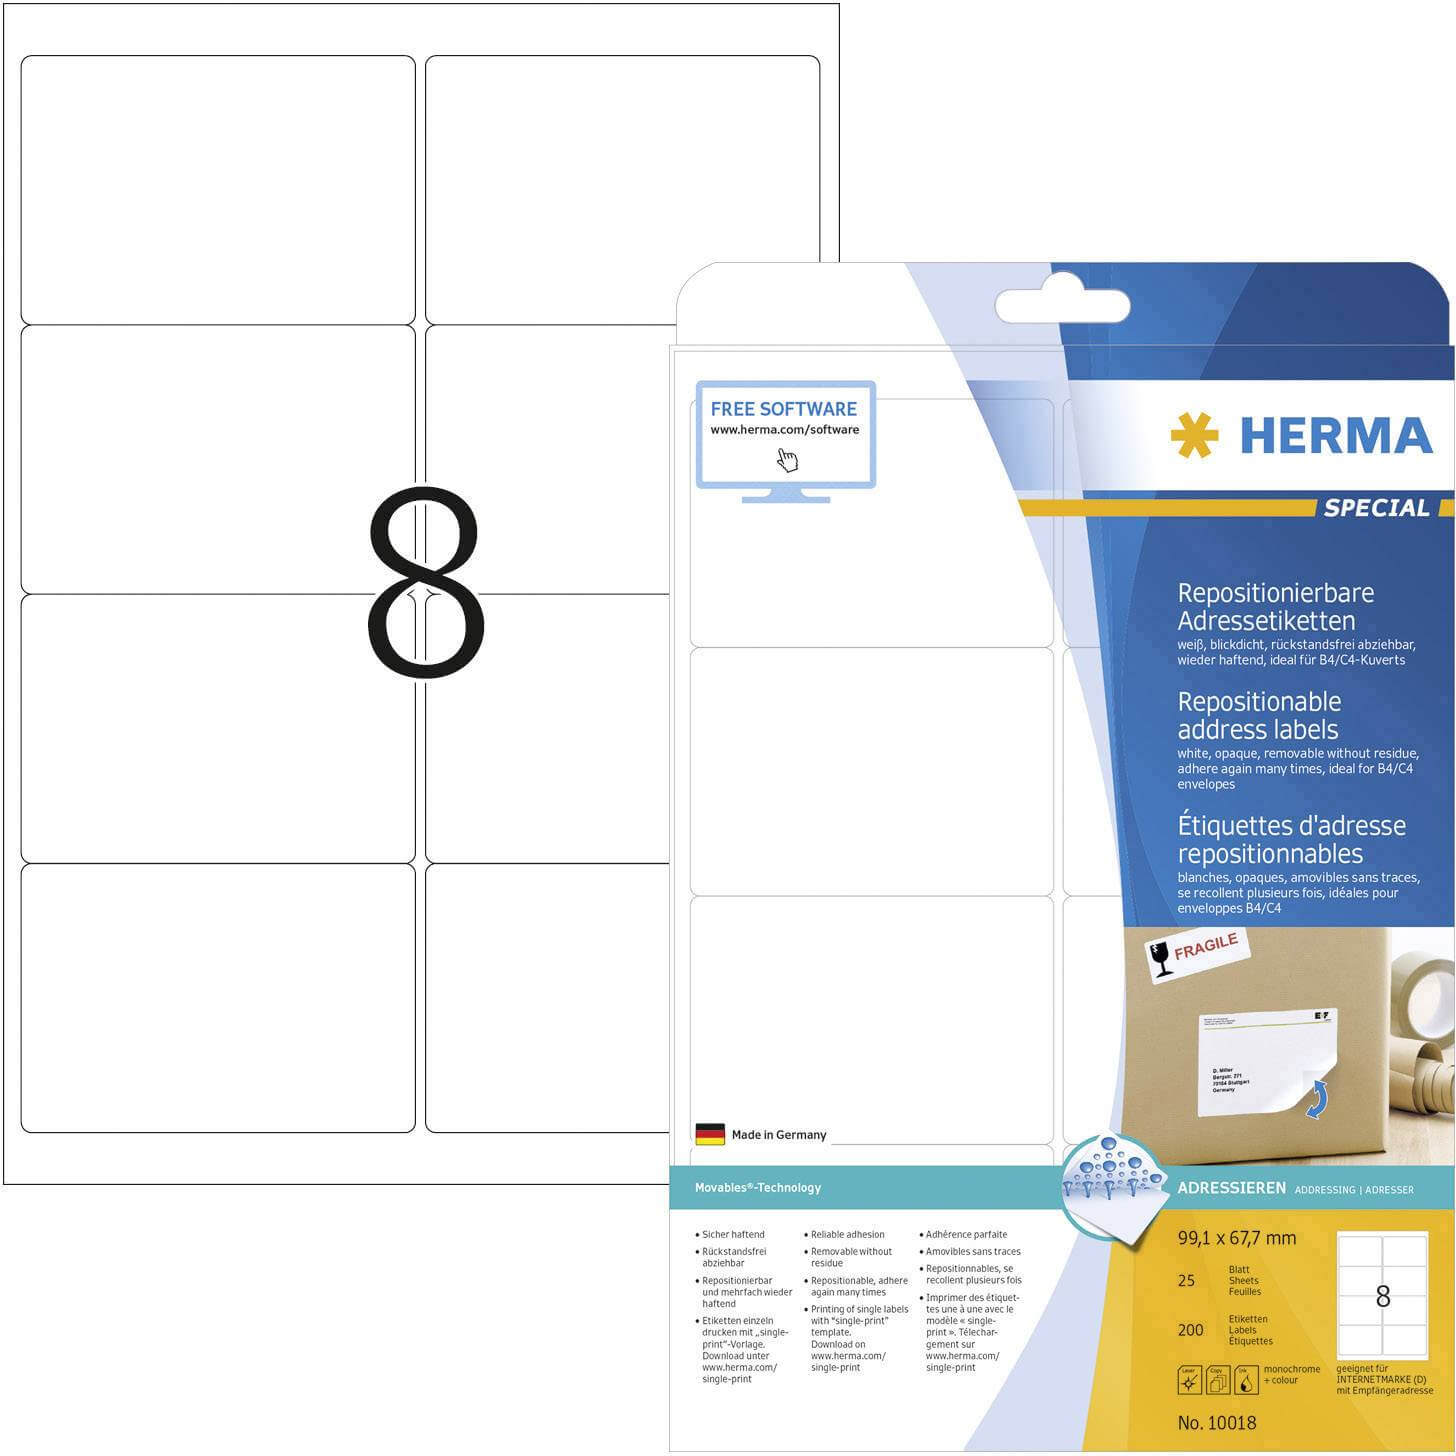 Herma 10018 Labels 99.1 X 67.7 Mm Paper White 200 Pc(S Intended For 99.1 X 67.7 Mm Label Template